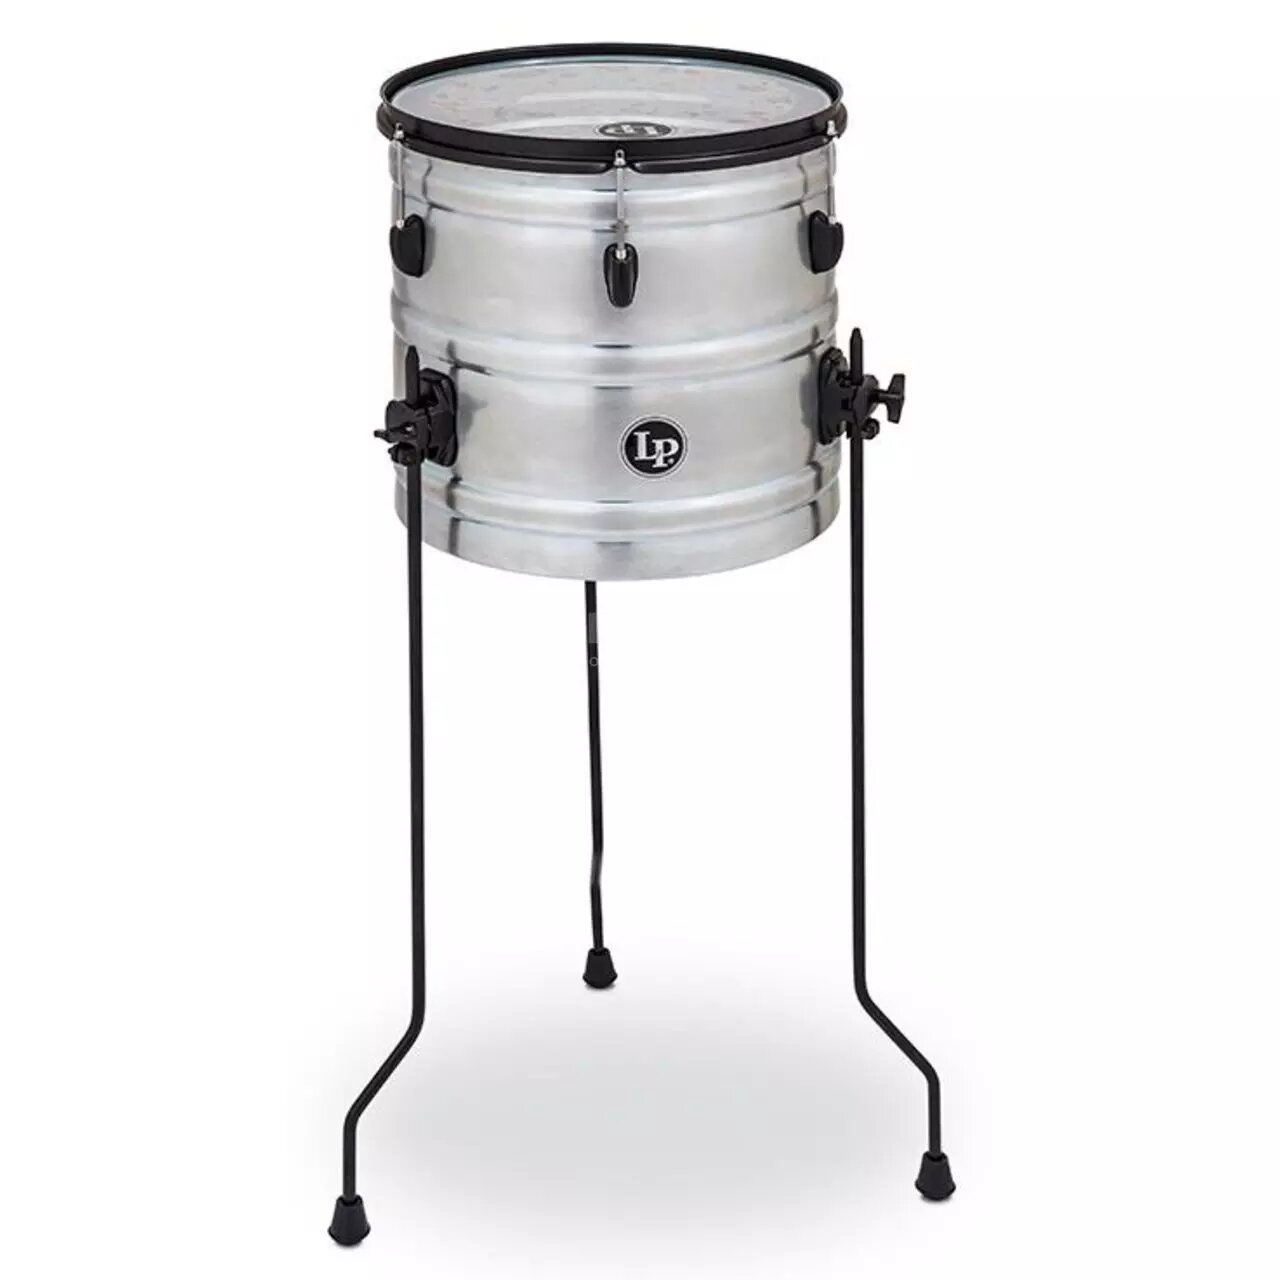 Latin Percussion LP1614 Raw Street Cans 14 